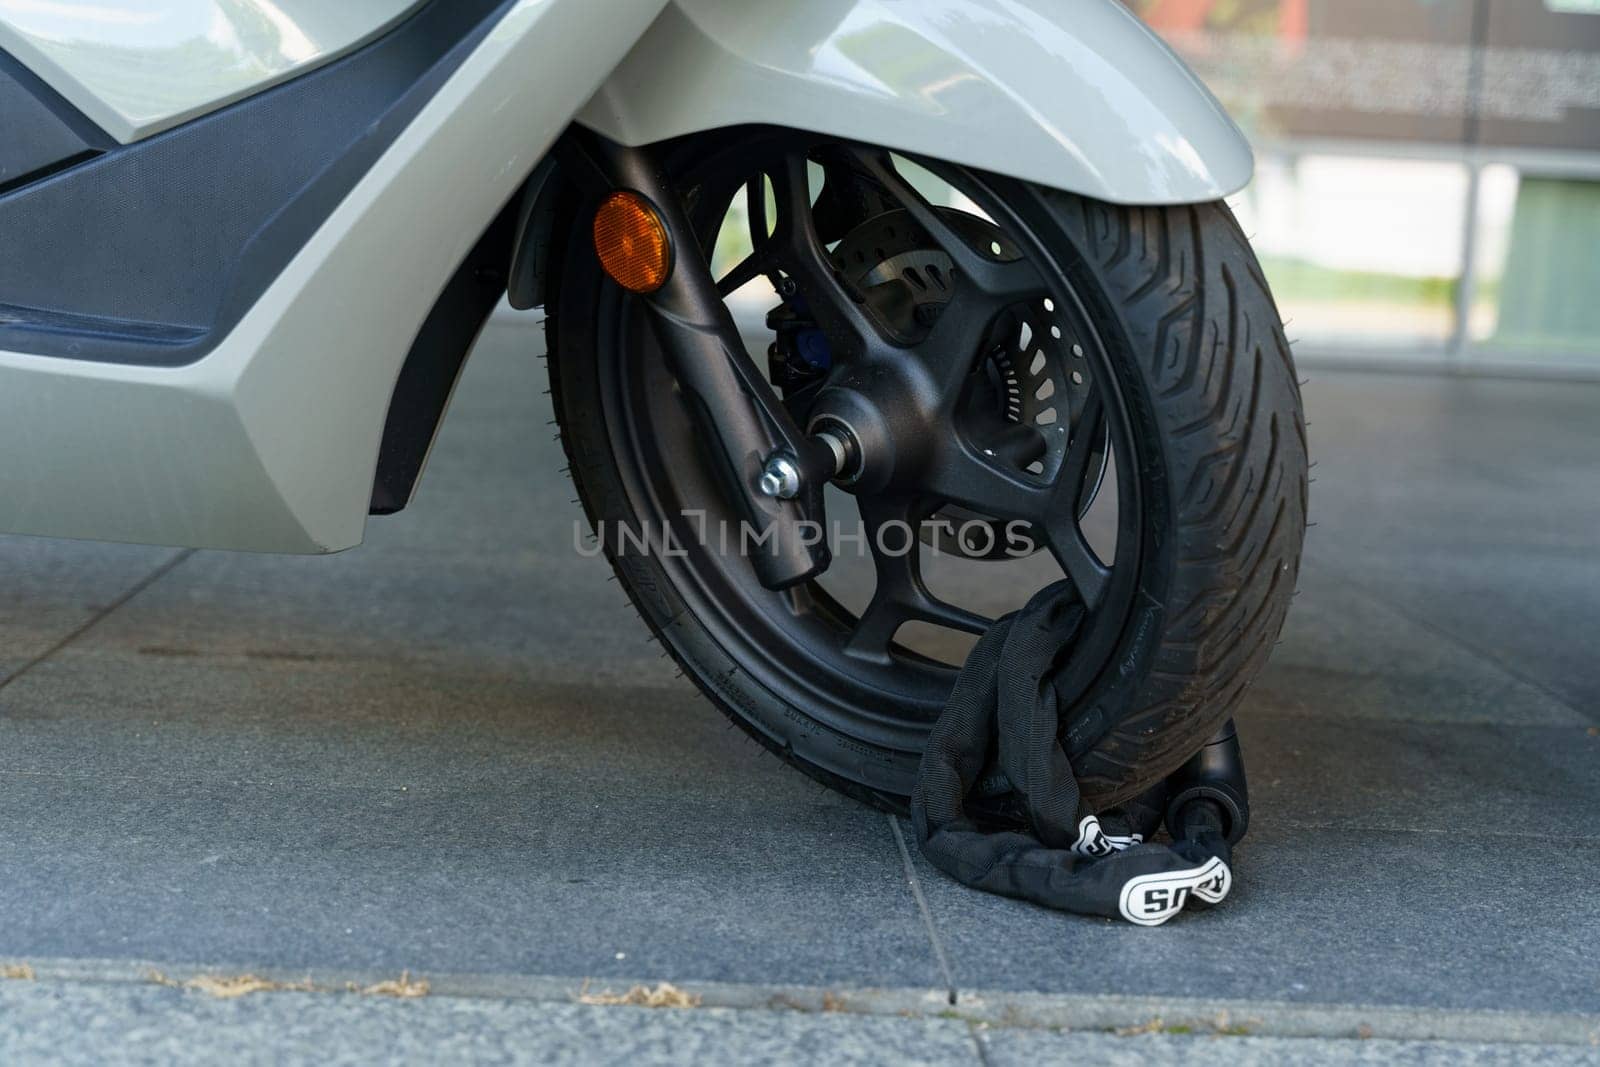 Wroclaw, Poland - August 4, 2023: A motorcycle attached to a tire with a lock, potentially for towing or transport purposes.